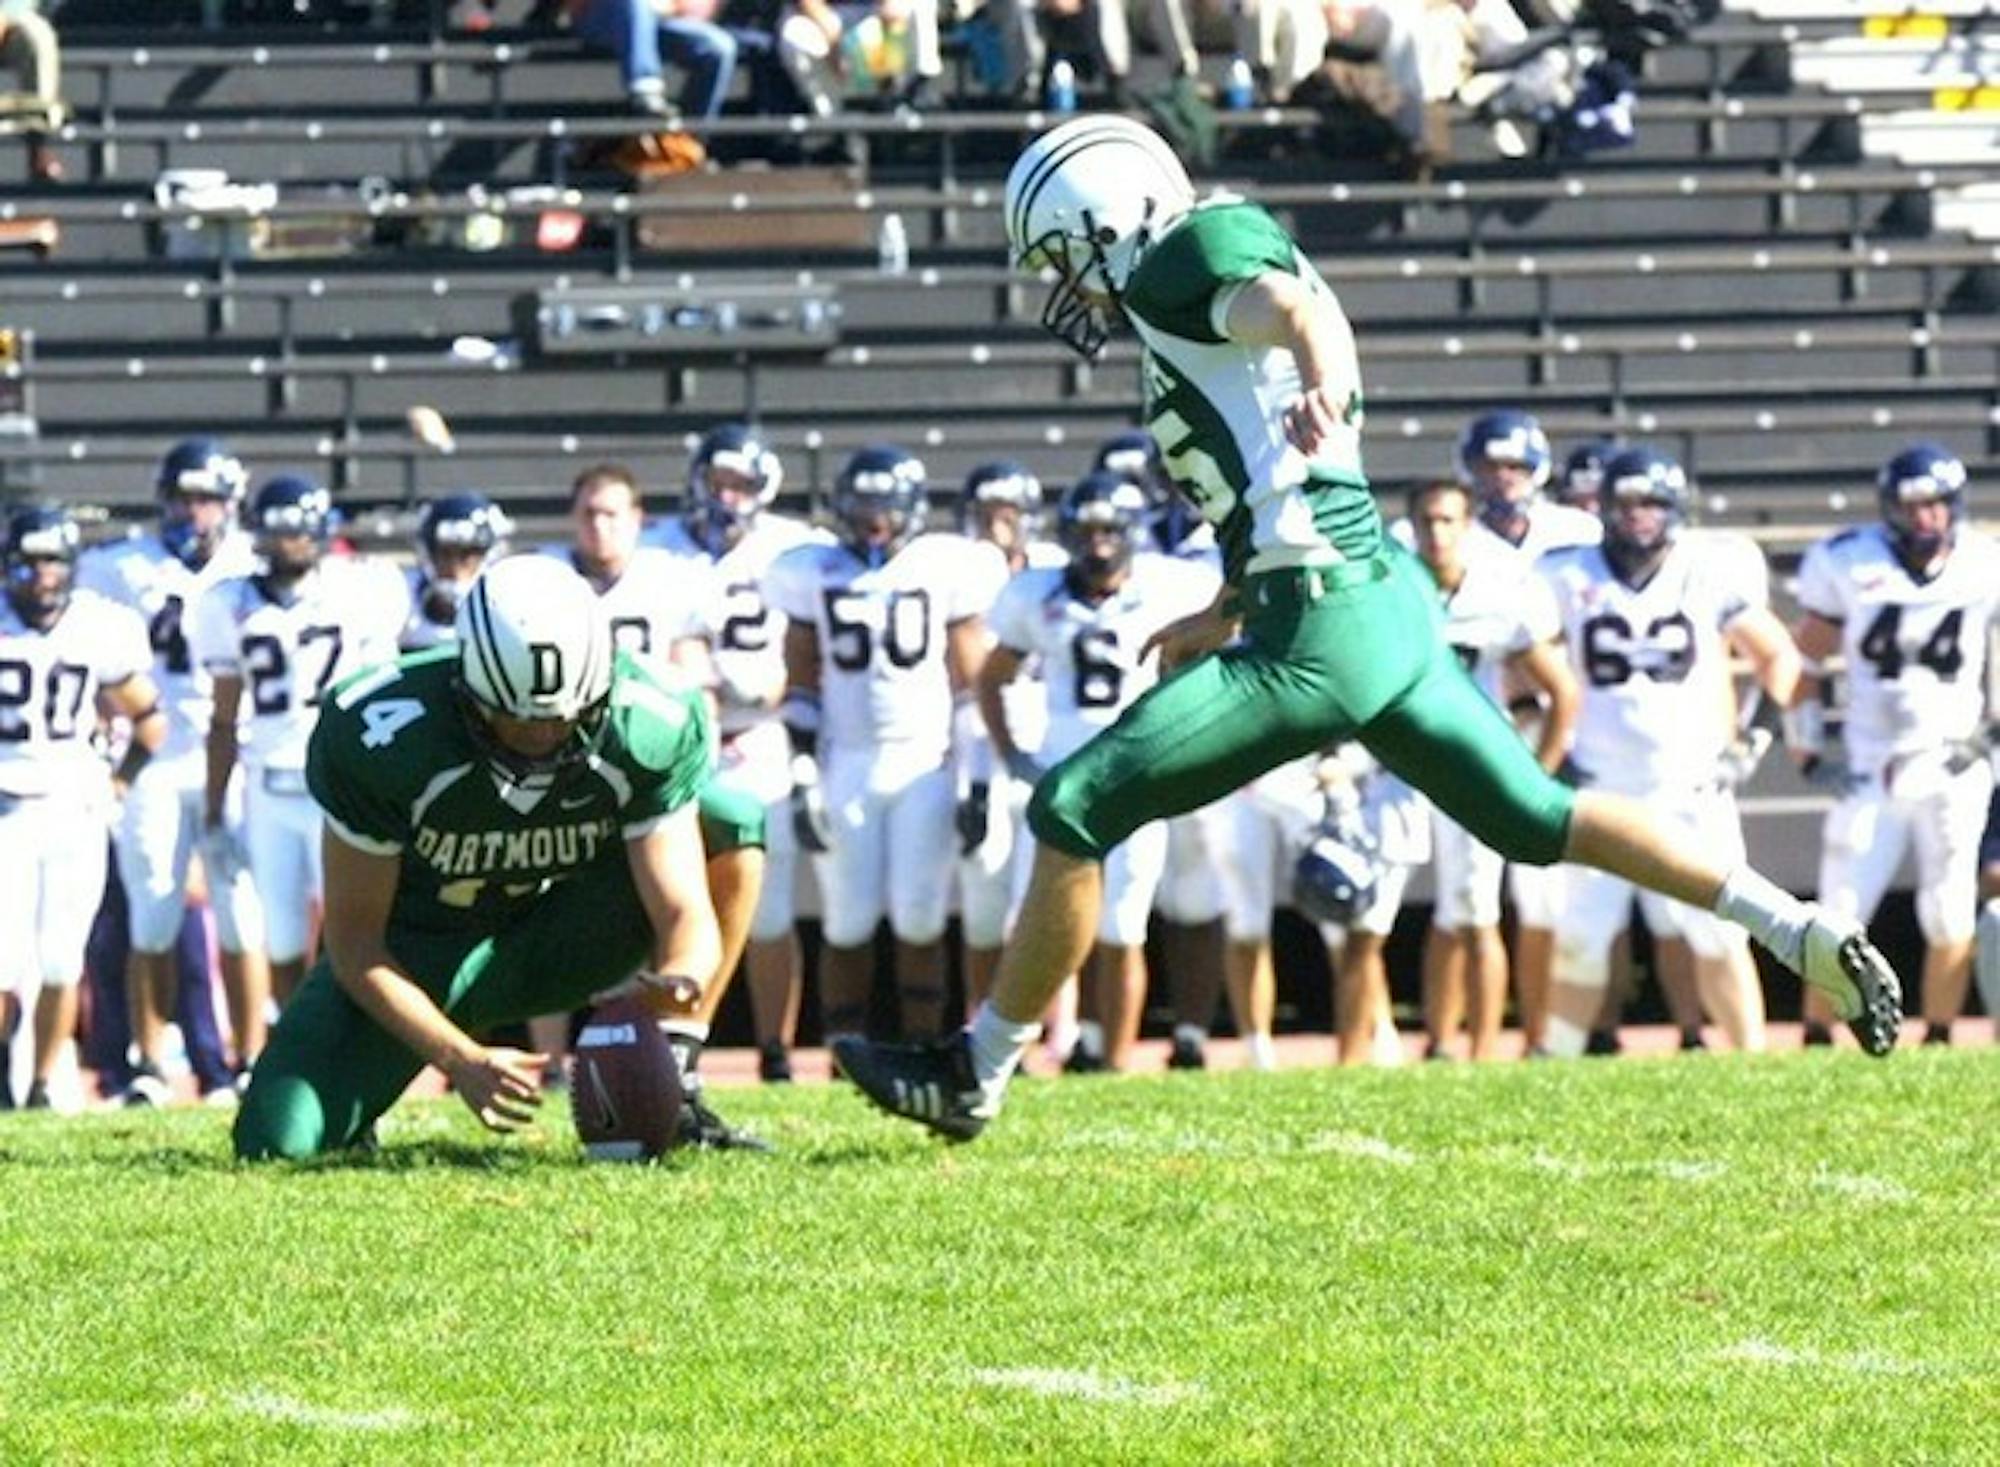 Dartmouth football could not kick or throw its way to victory on Saturday at Penn, losing by seven to the Quakers.